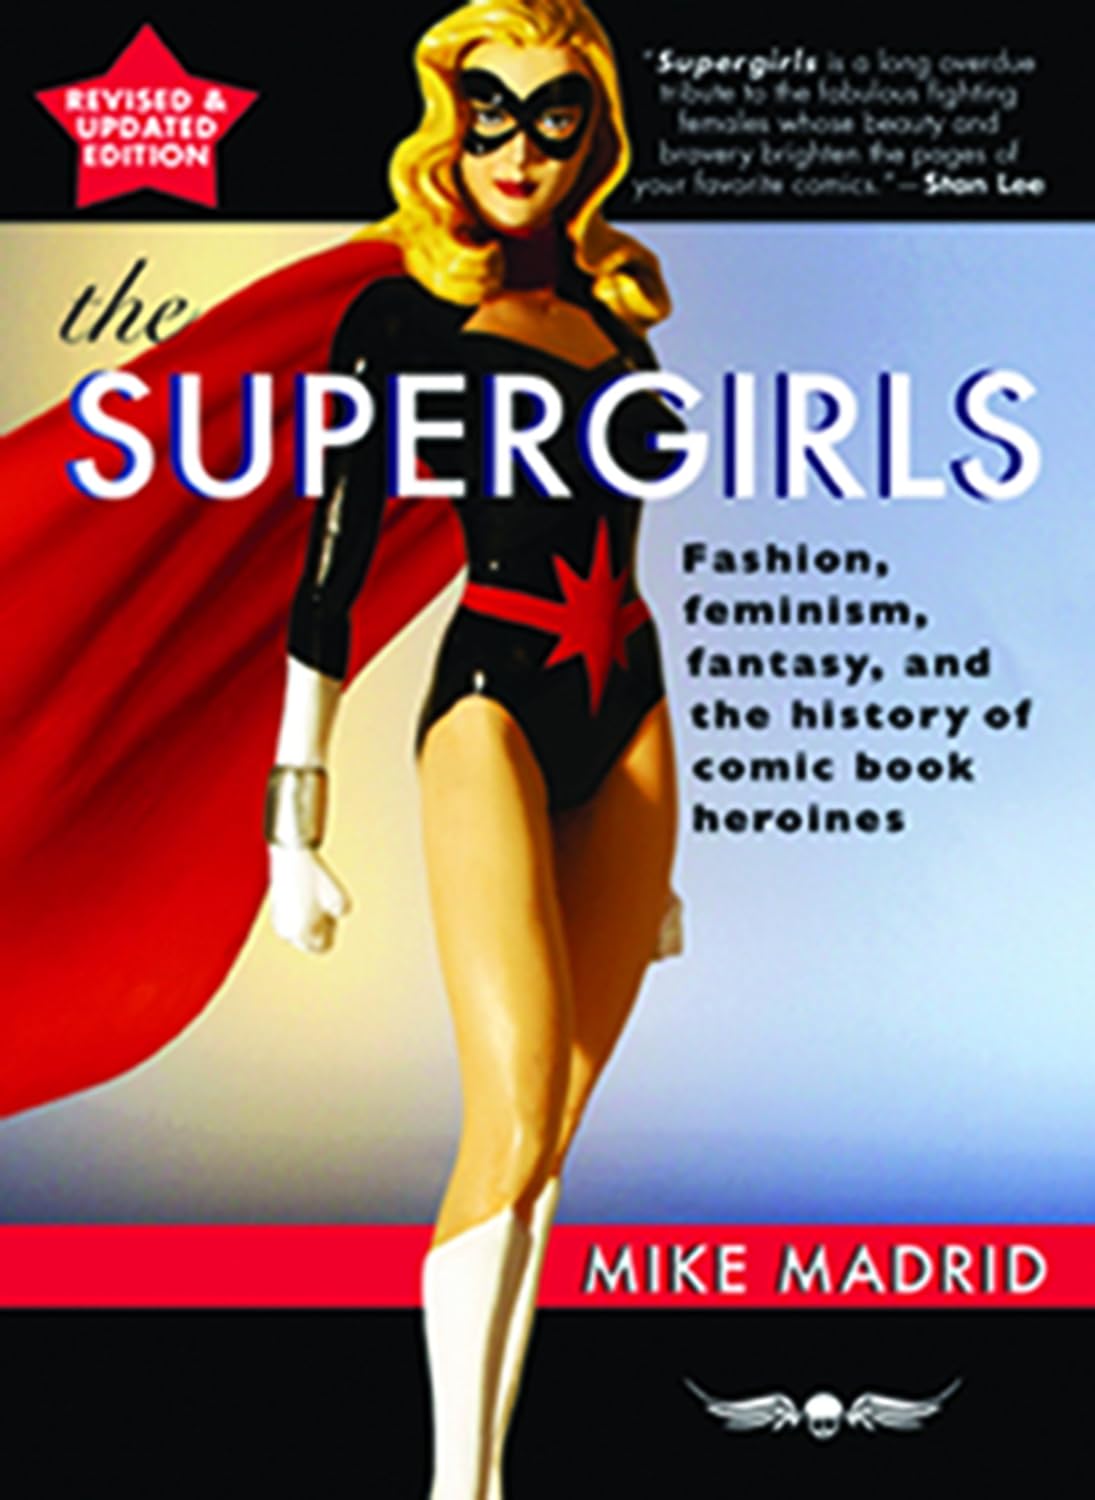 THE SUPERGIRLS: FEMINISM, FANTASY, AND THE HISTORY OF COMIC BOOK HEROINES